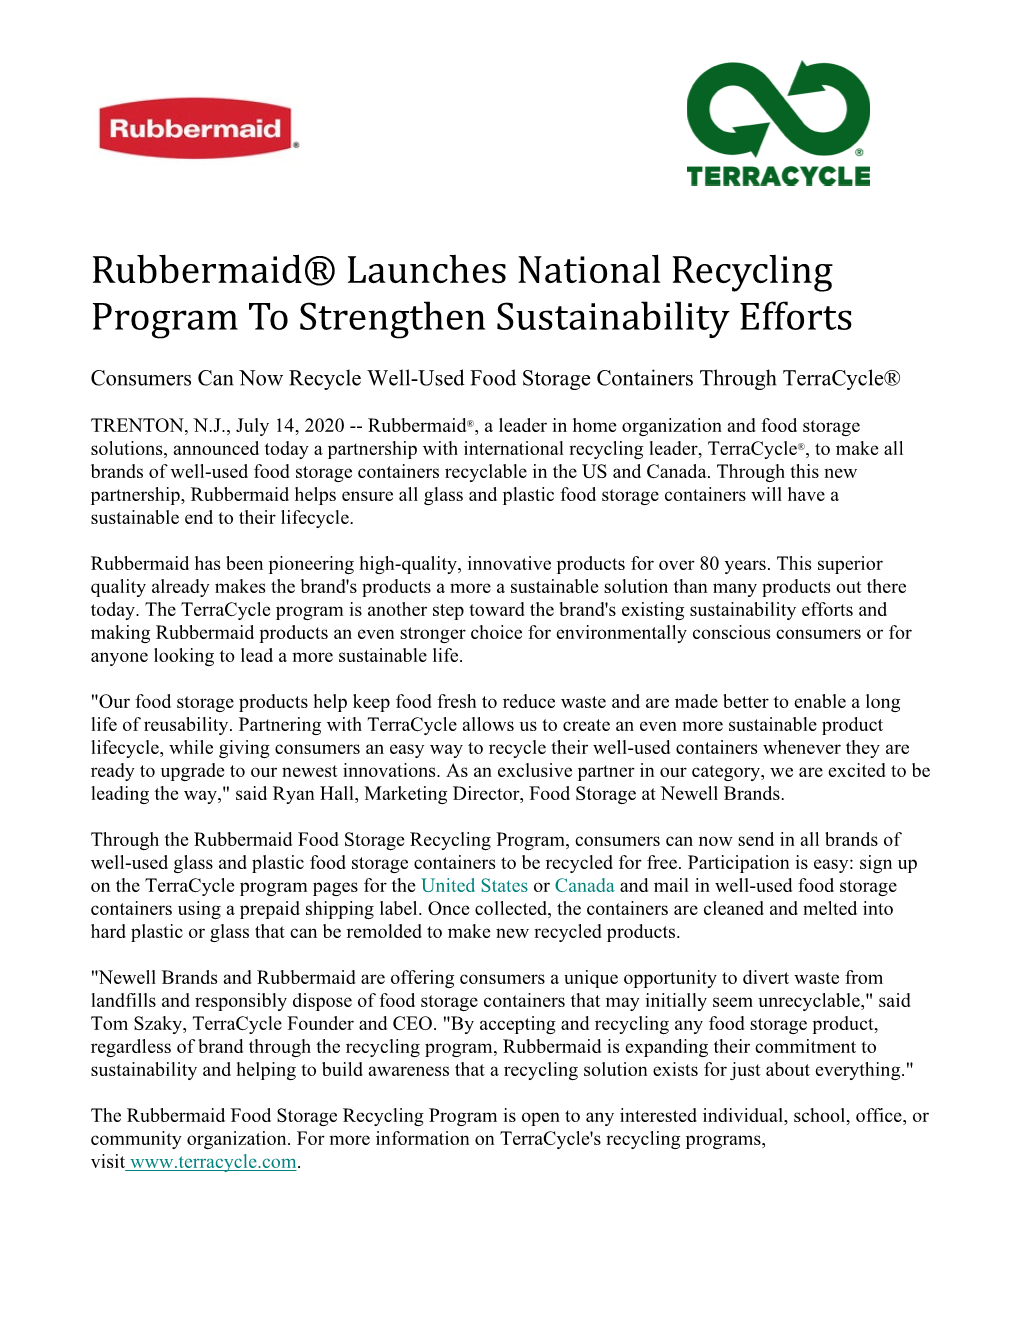 Rubbermaid® Launches National Recycling Program to Strengthen Sustainability Efforts